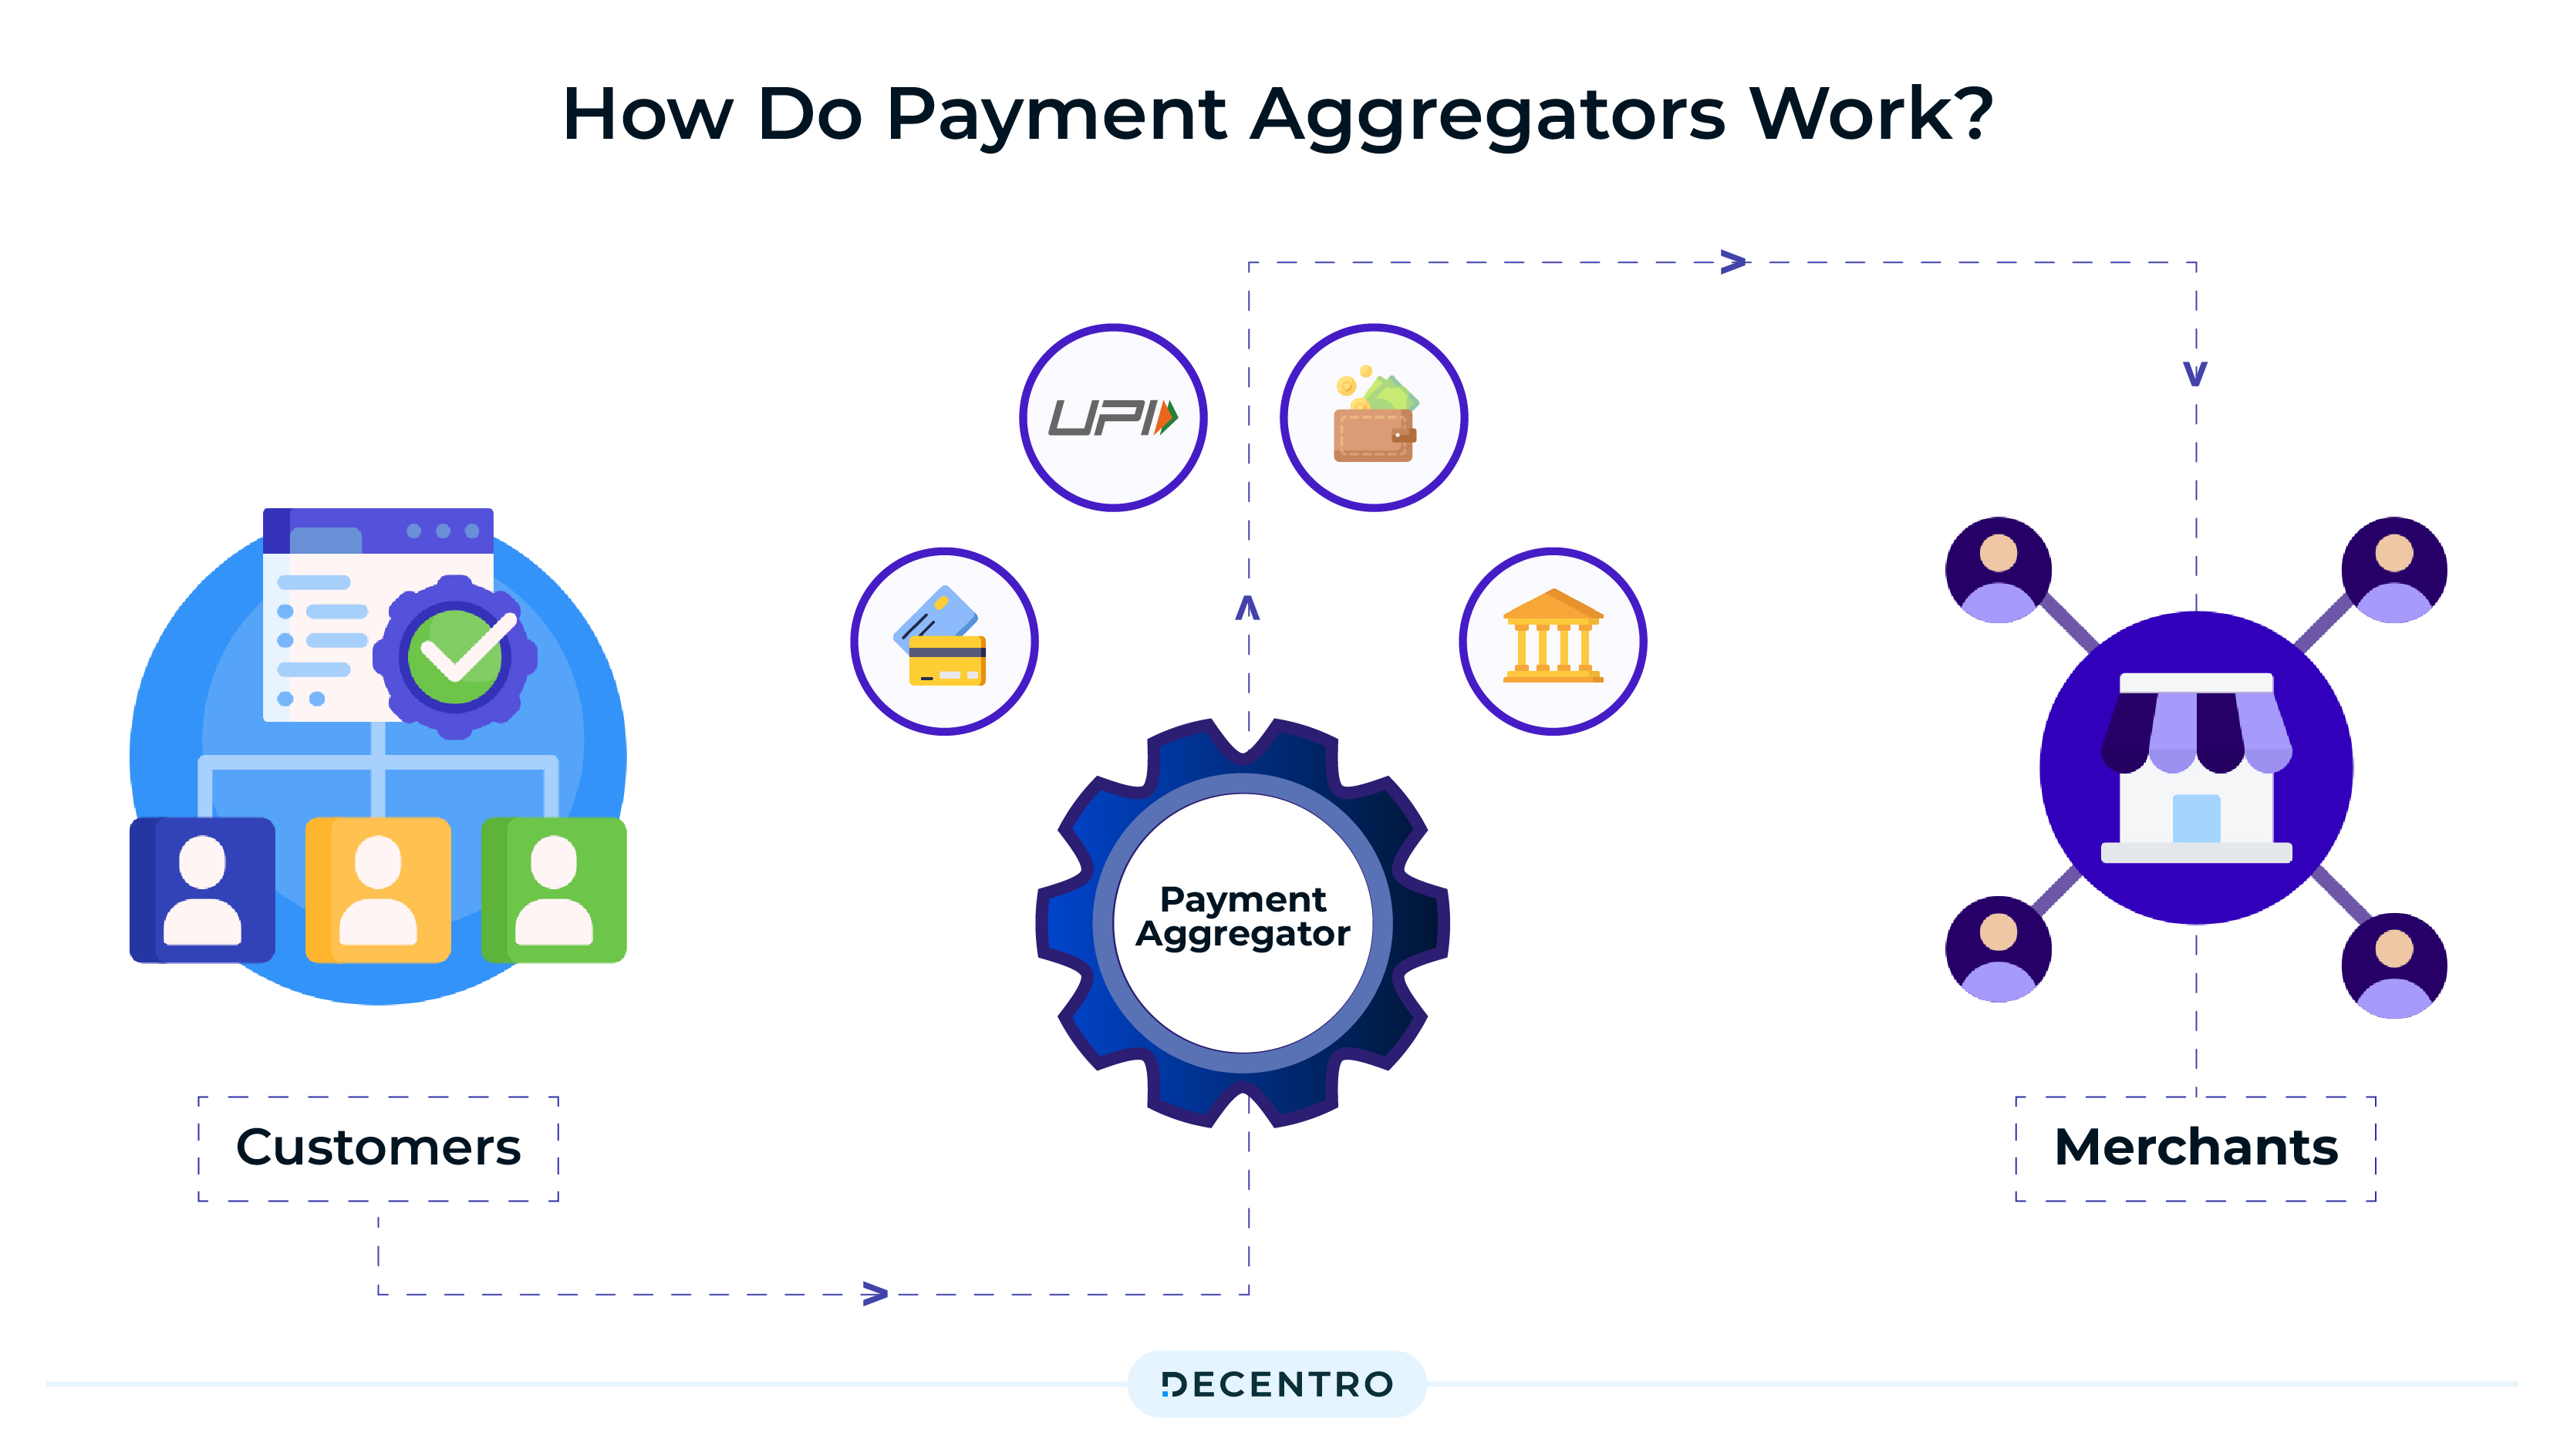 How do Payment Aggregators work?